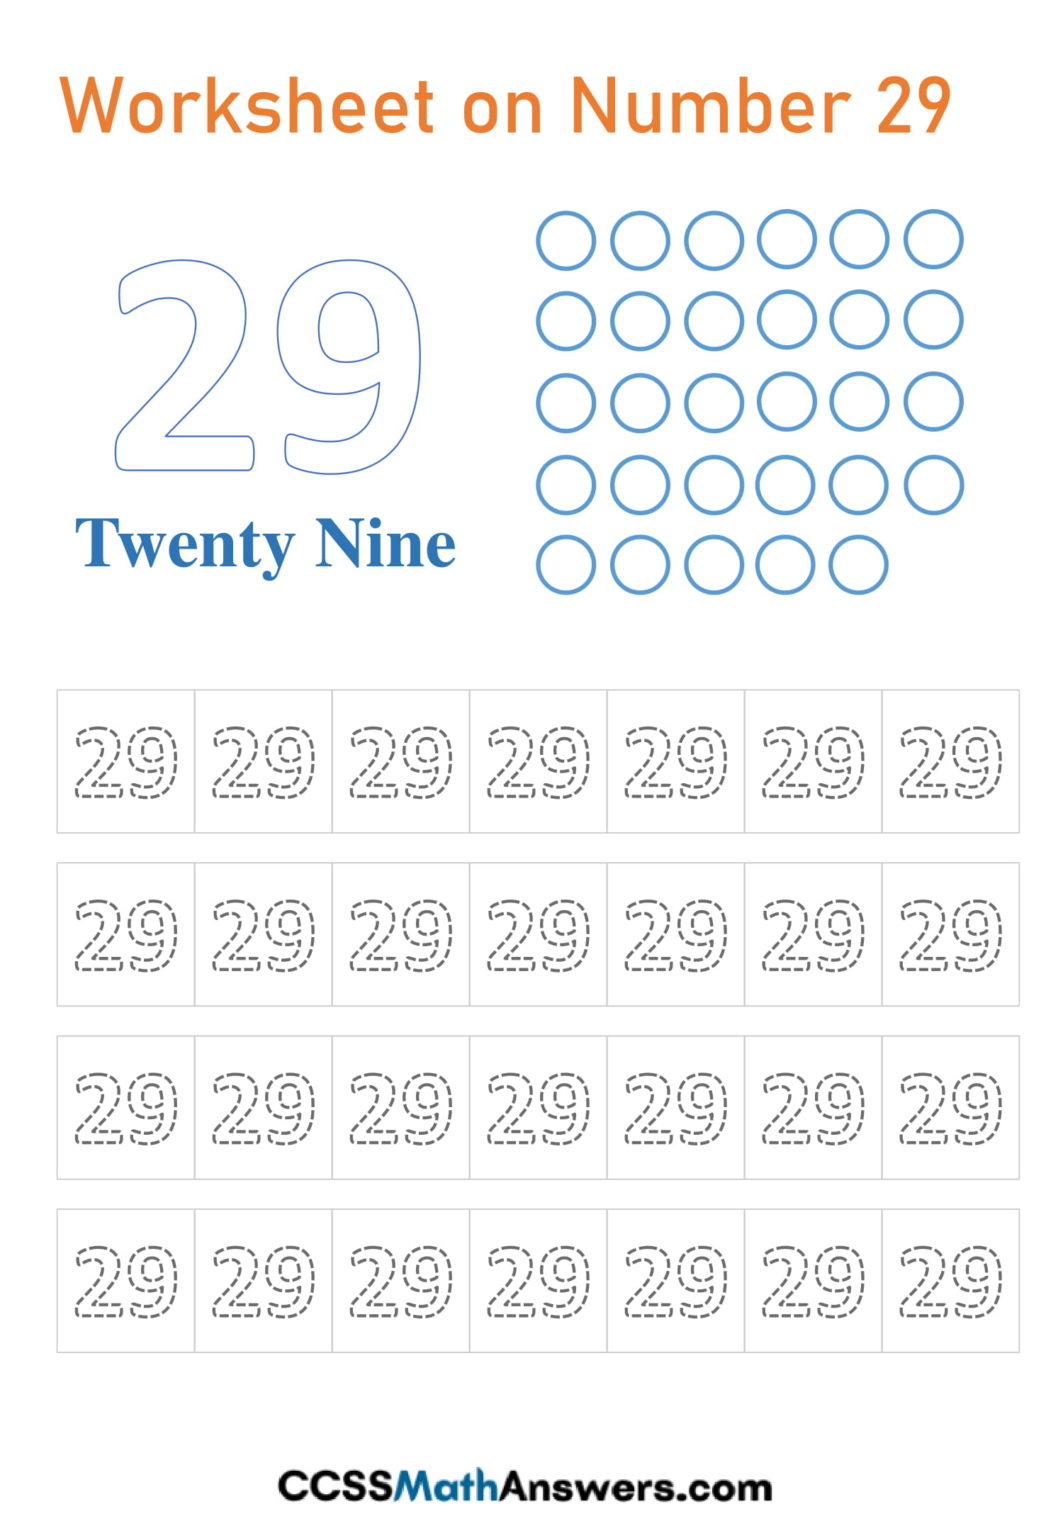 Worksheet On Number 29 Free Number 29 Tracing Writing Counting Worksheets For Preschool